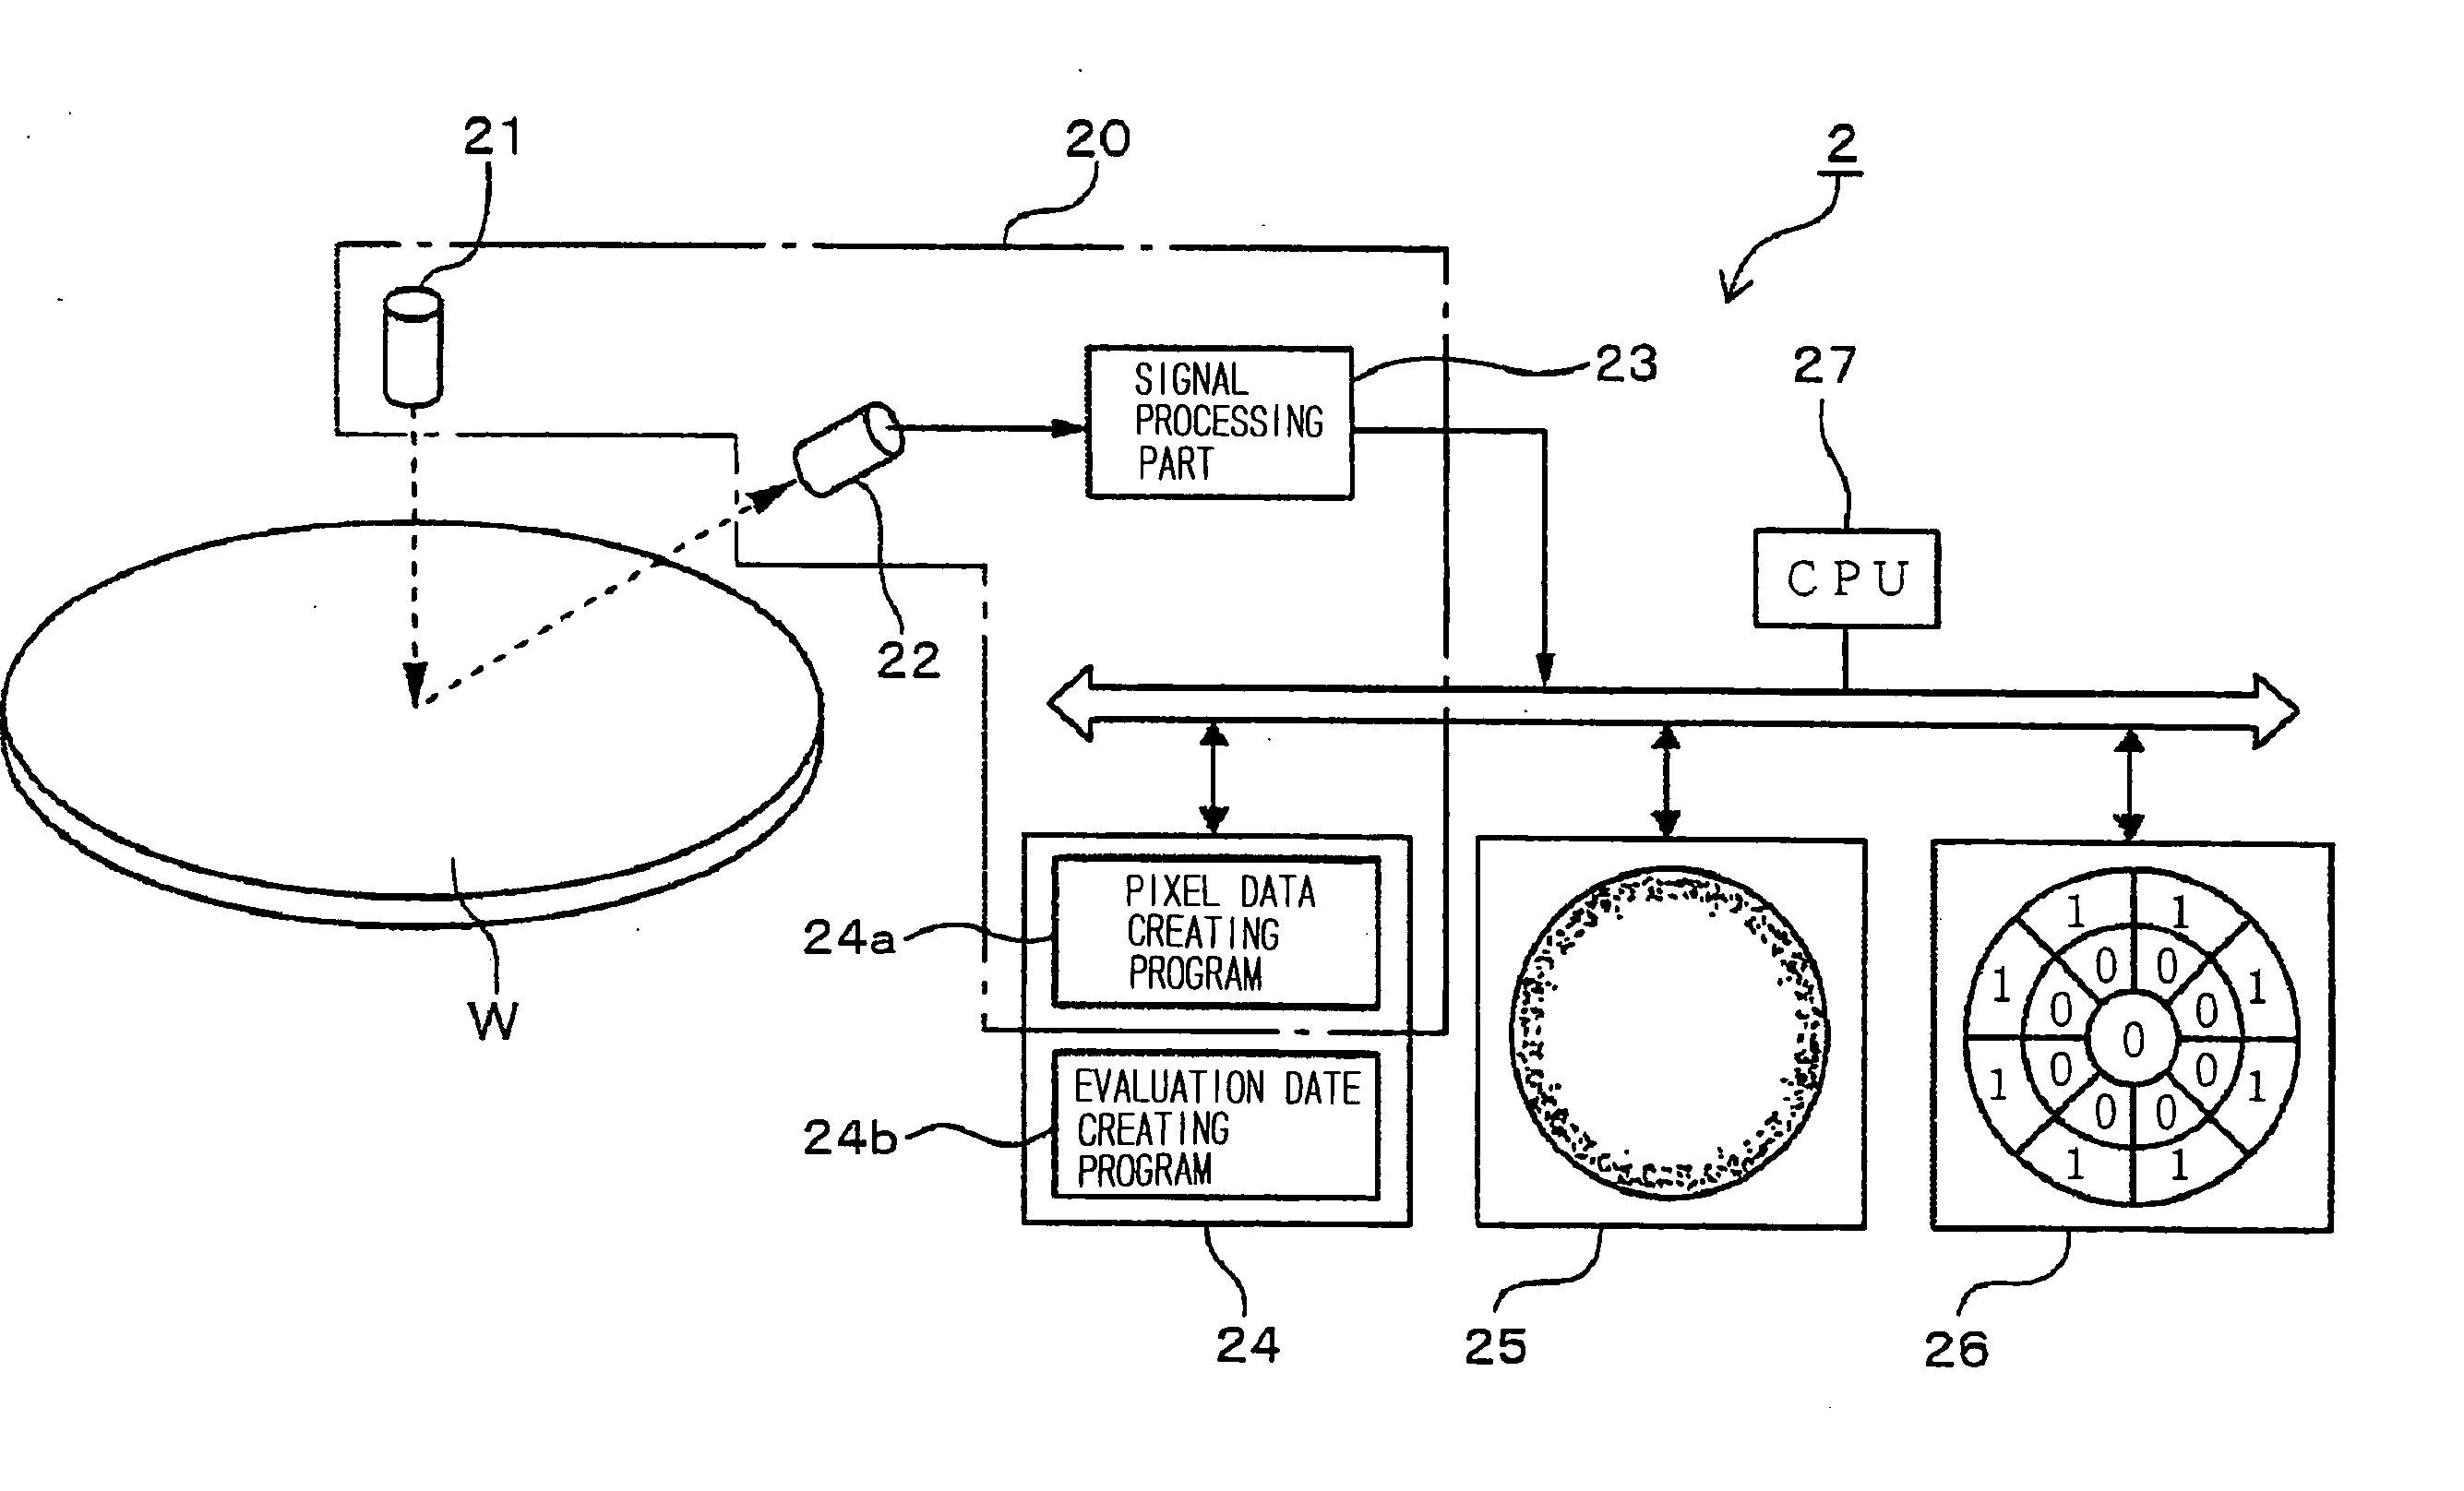 Semiconductor device manufacturing system